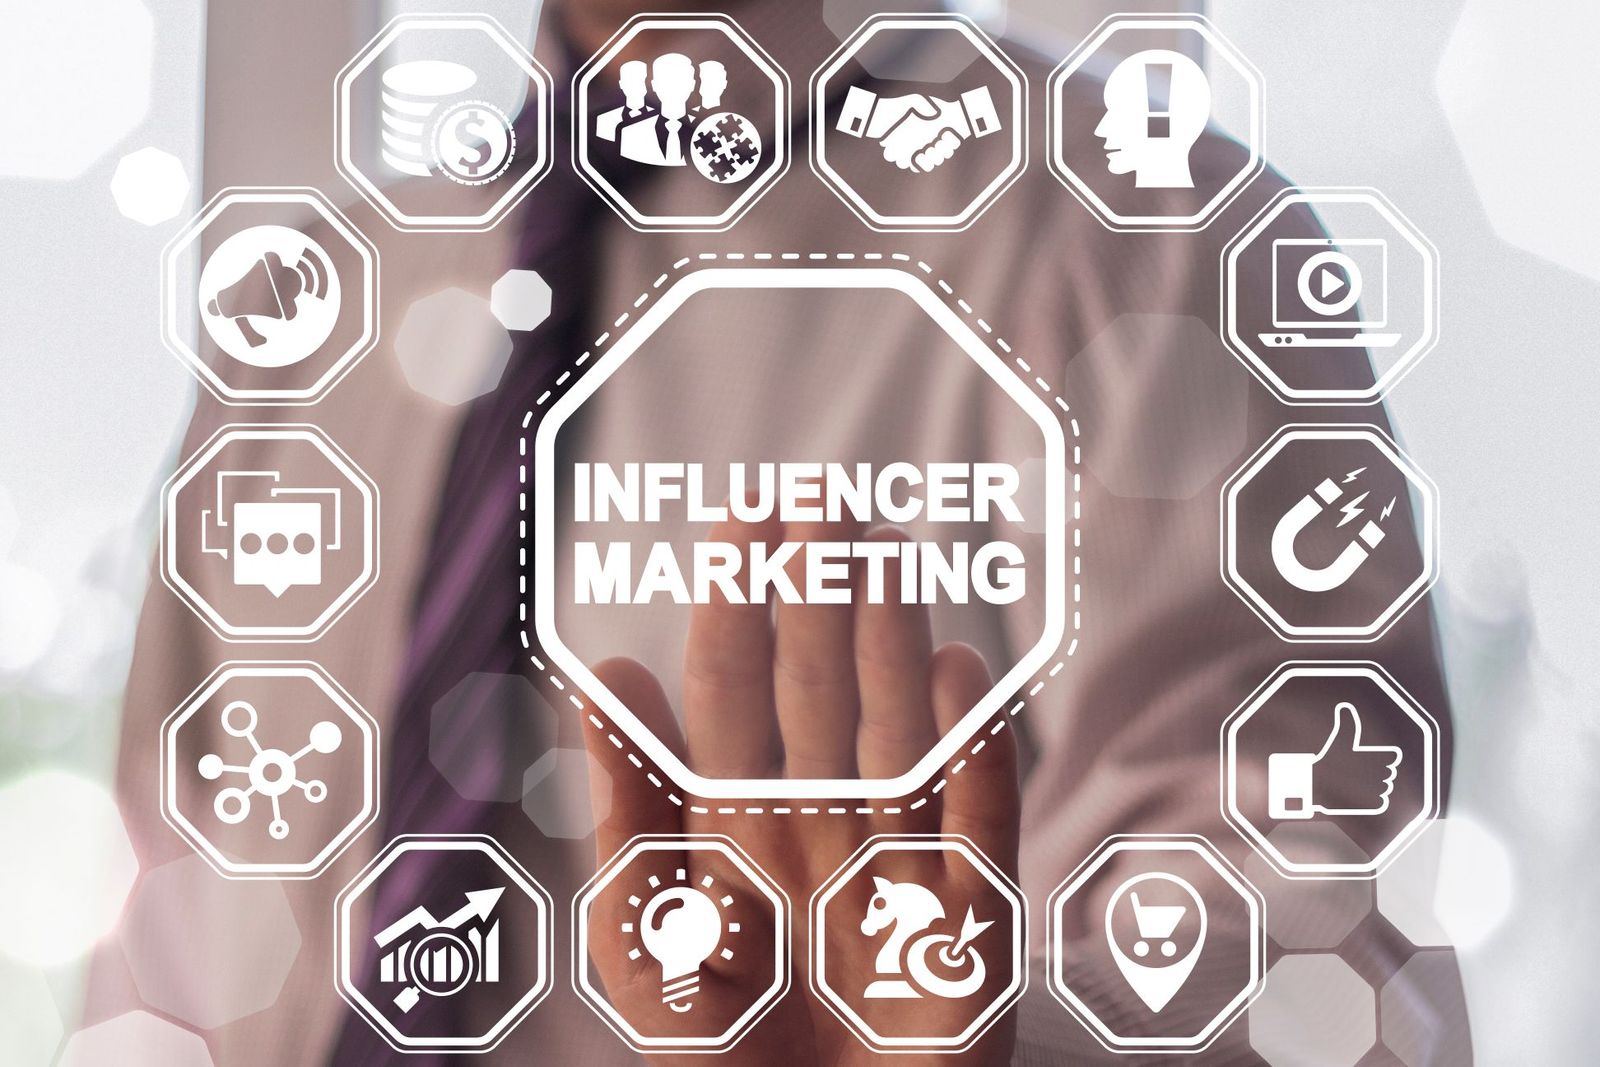 How Do You Develop an Influencer Strategy?